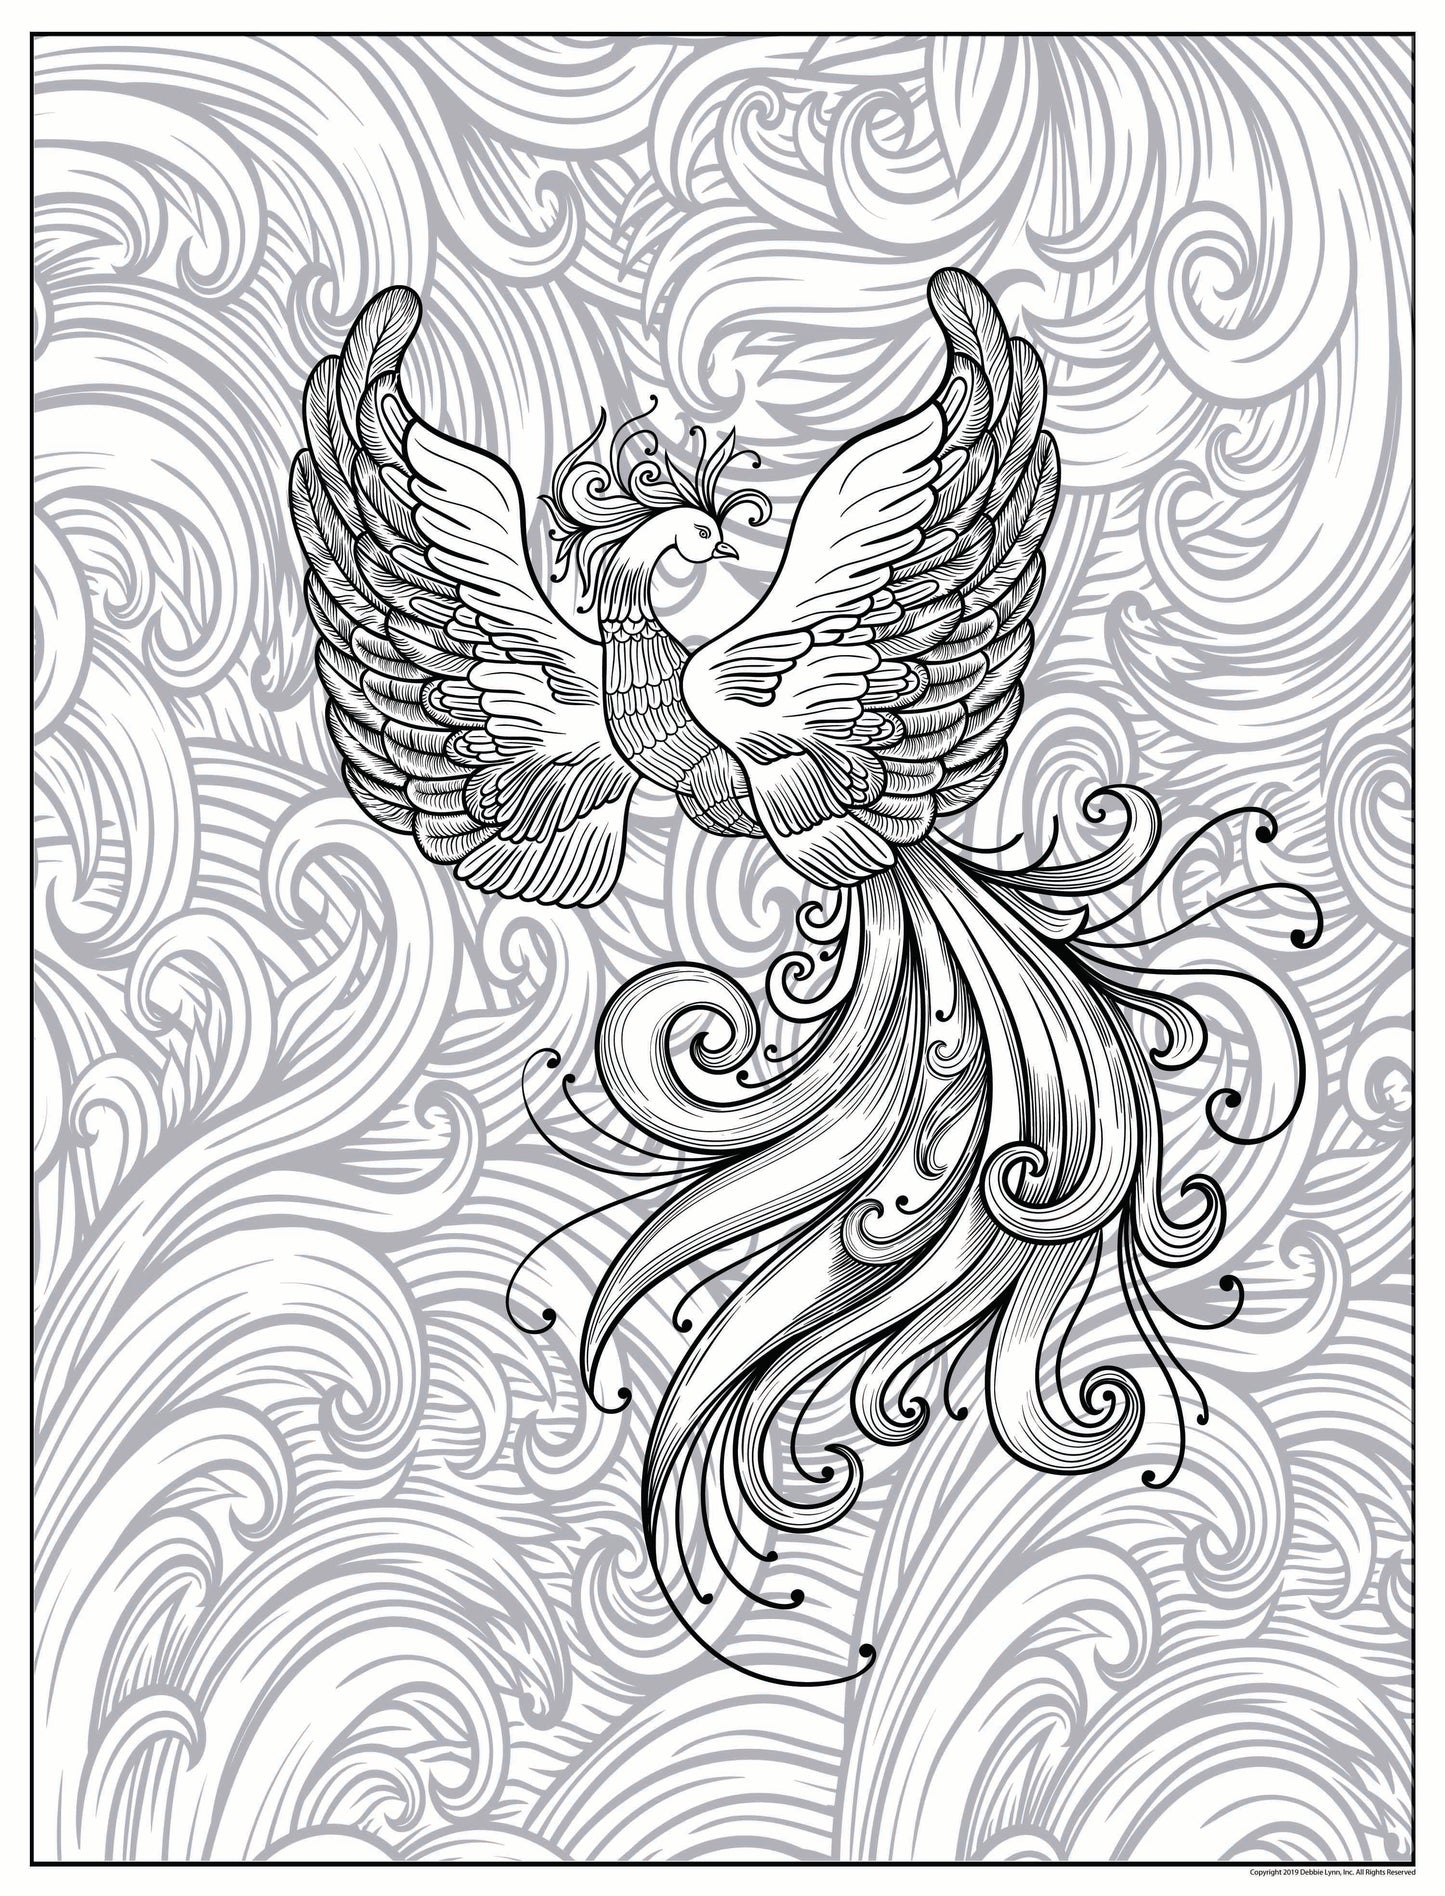 Phoenix Personalized Giant Coloring Poster 46"x60"